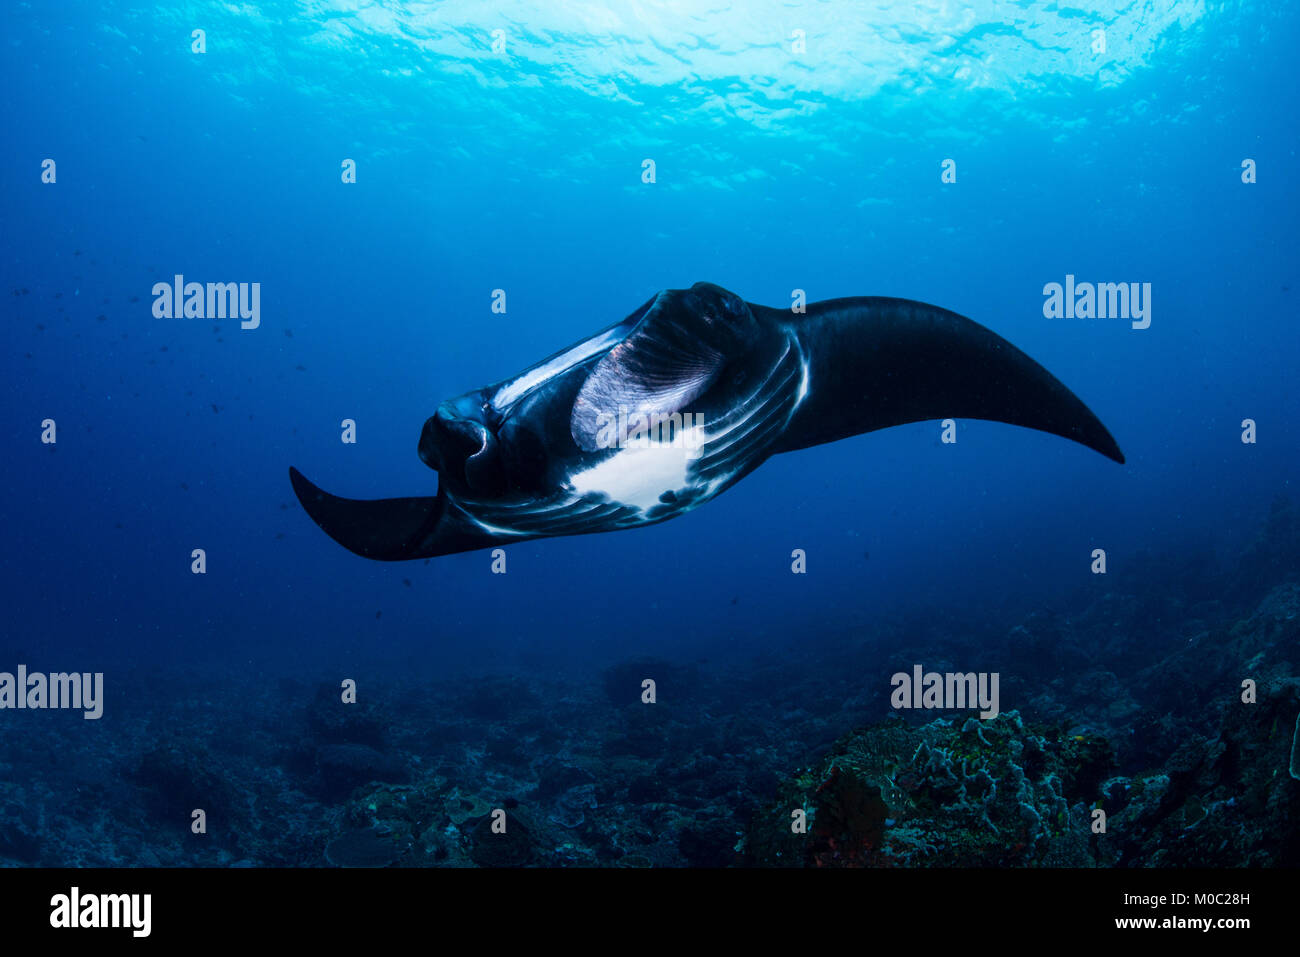 A black morph manta ray, manta or now known as mobula alfredi from the Indian Ocean, south Komodo National Park, Indonesia. Stock Photo